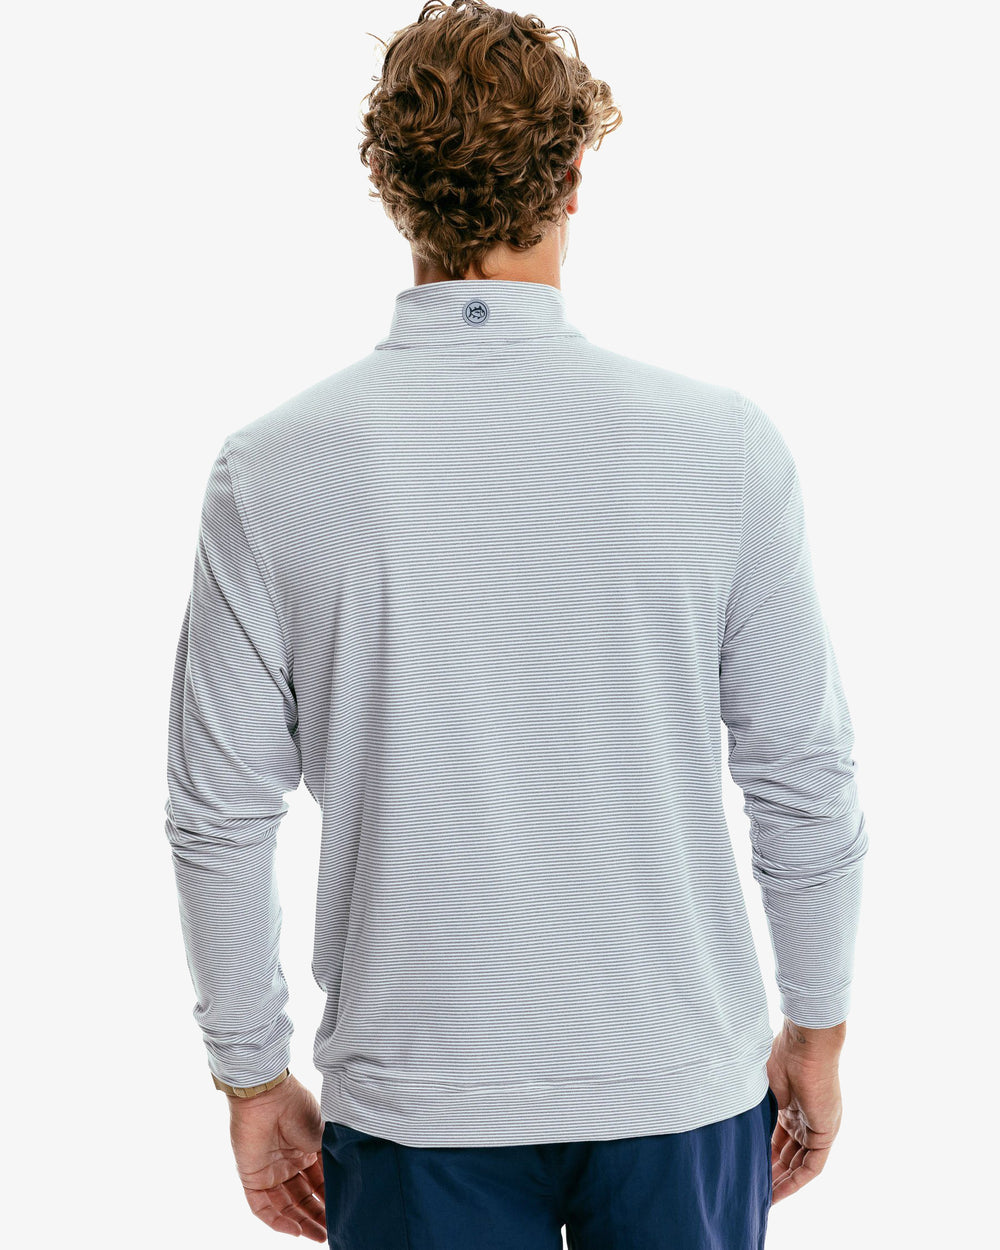 The back of the Men's Cruiser Heather Micro Striped Performance Quarter Zip Pullover by Southern Tide - Heather Steel Grey